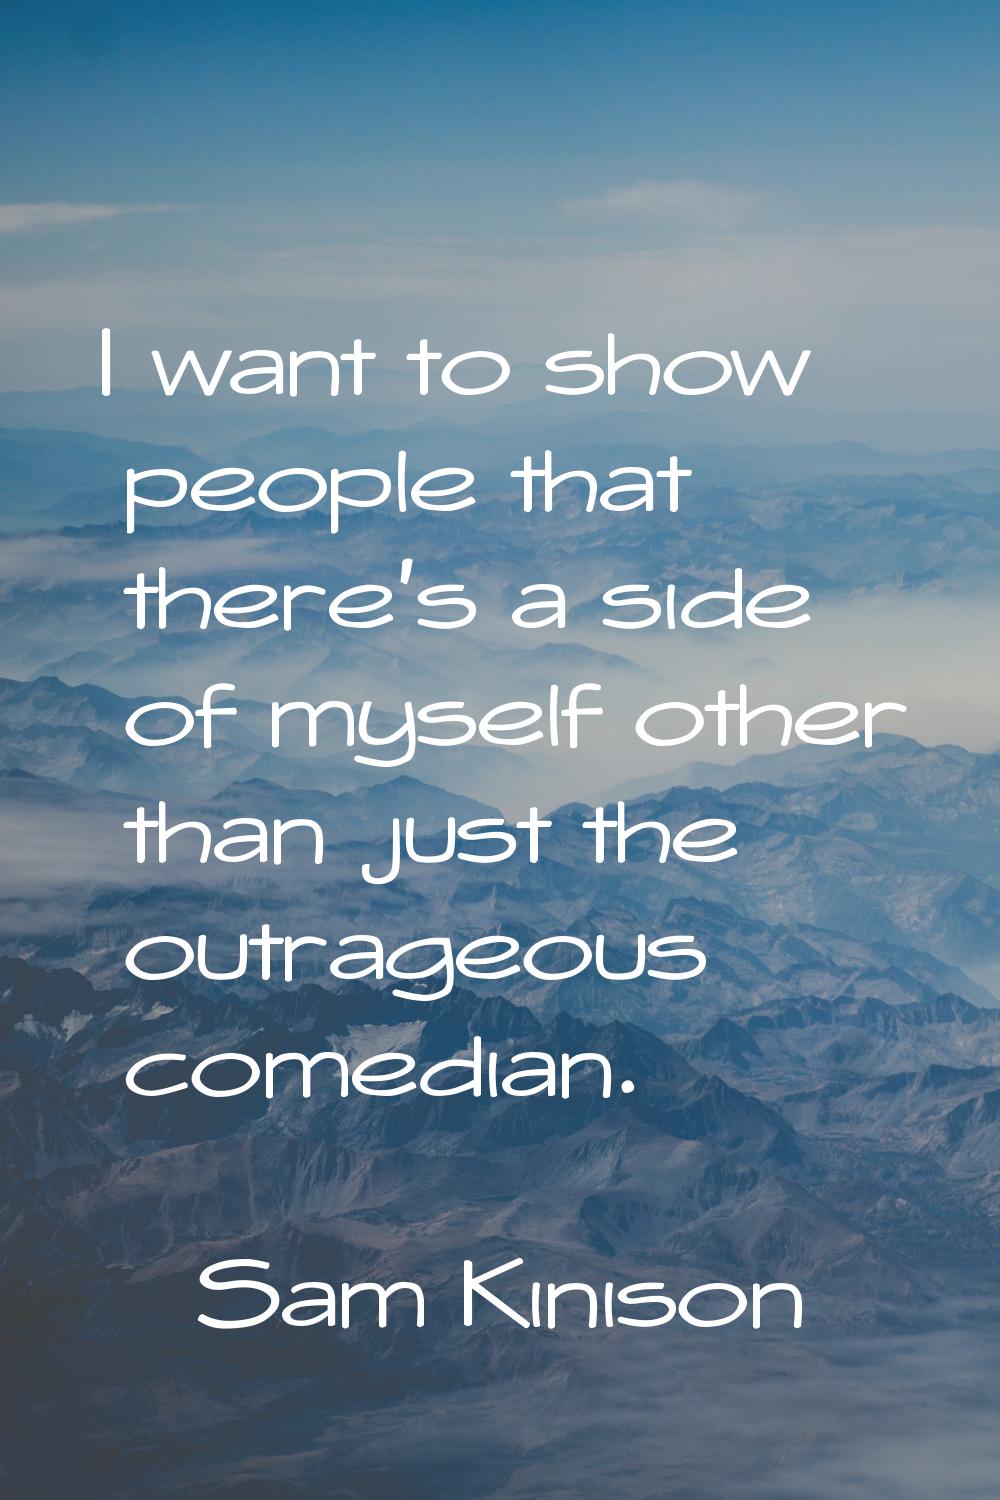 I want to show people that there's a side of myself other than just the outrageous comedian.